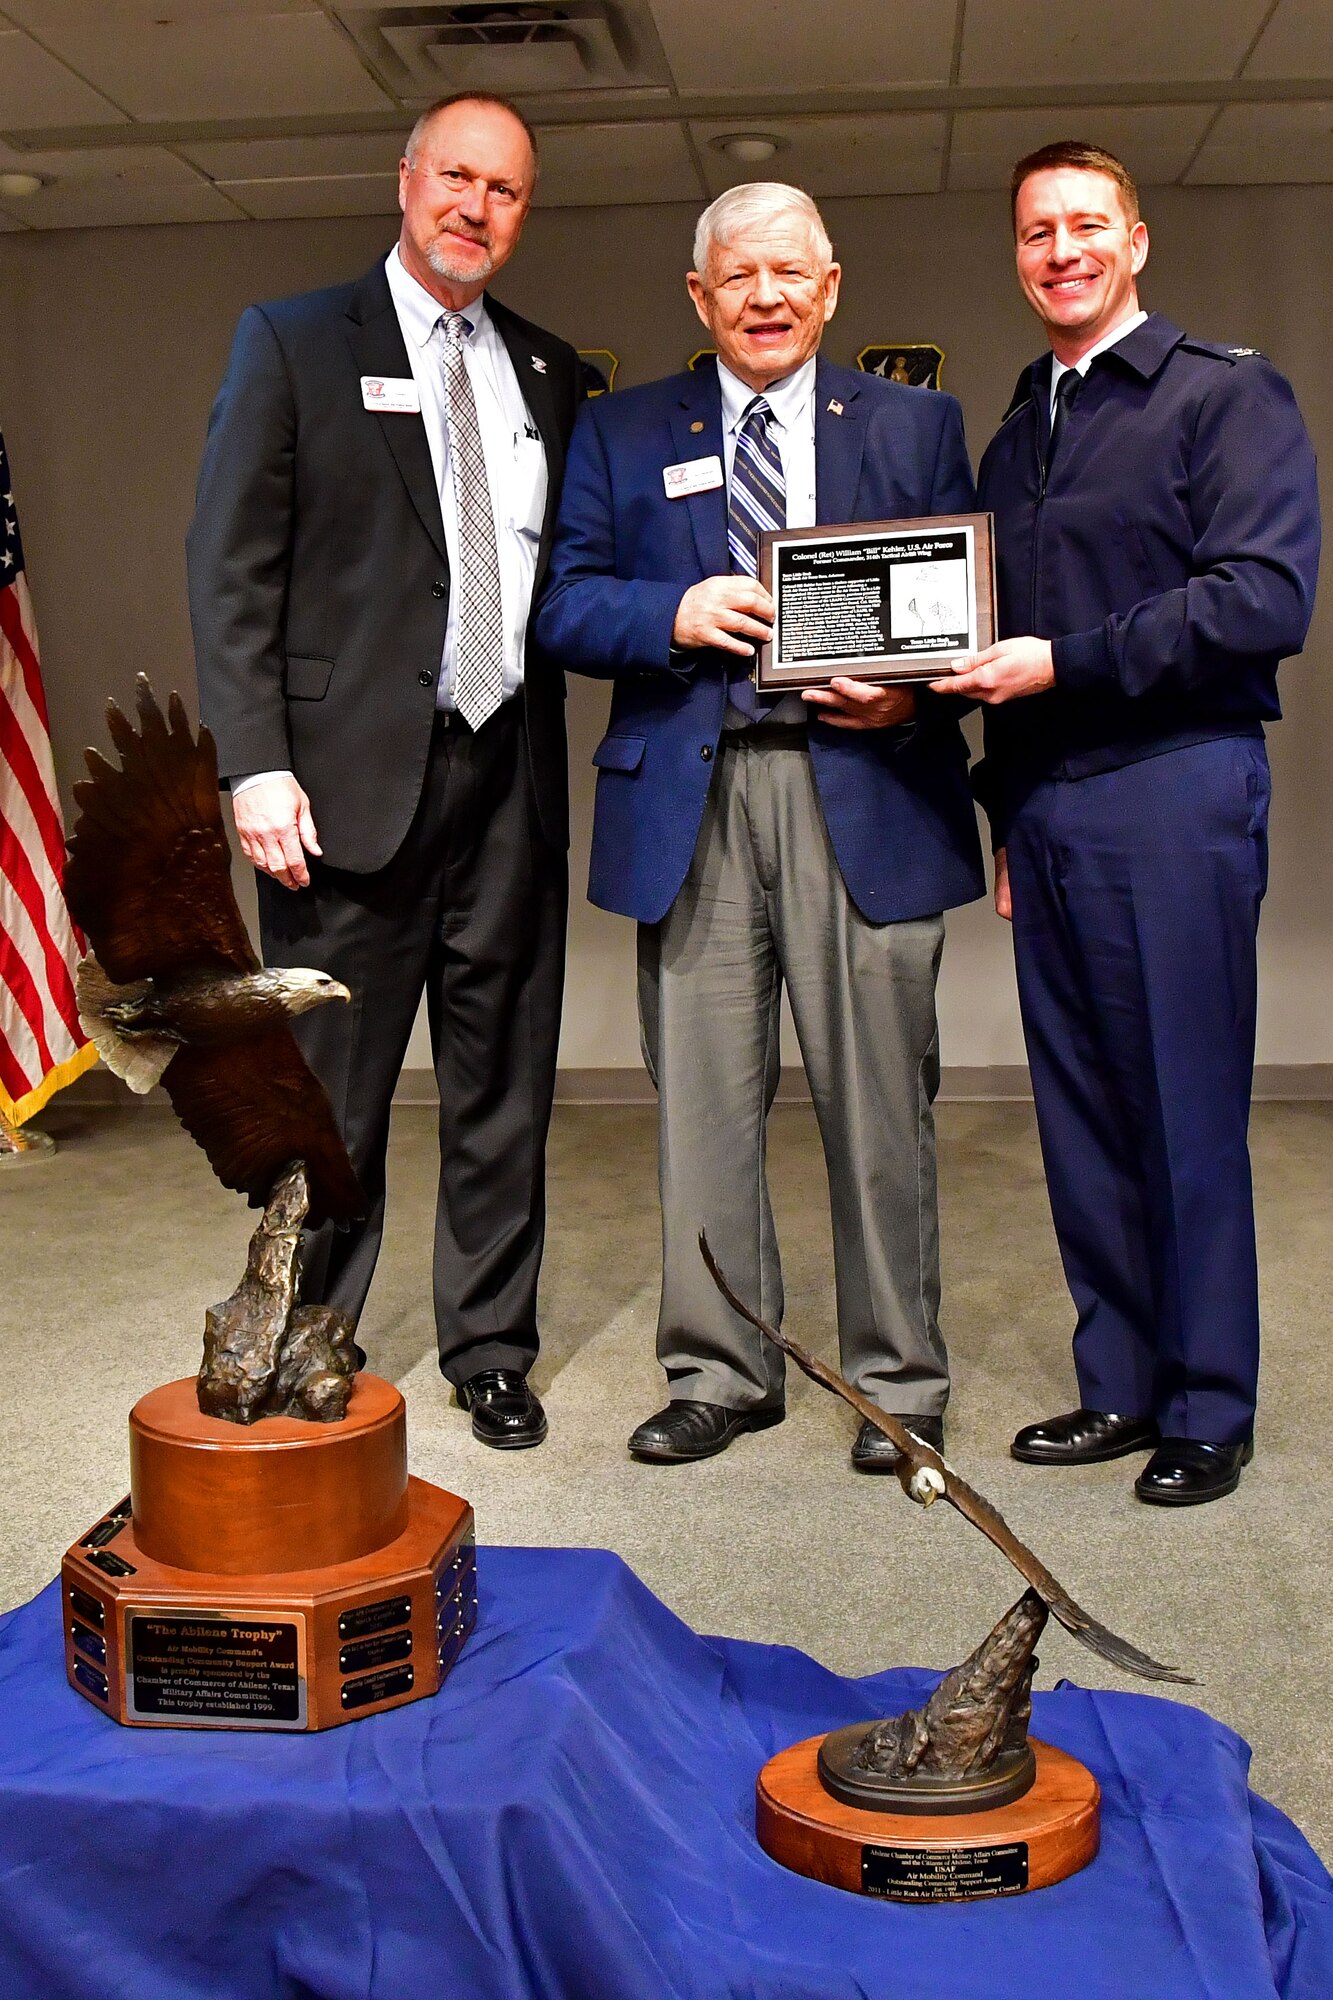 U.S. Air Force Colonel (Ret) Bill Kehler, former 314th Tactical Airlift Wing commander, is awarded the 2019 Team Little Rock Cornerstone Award by U.S. Air Force Col. John Schutte.